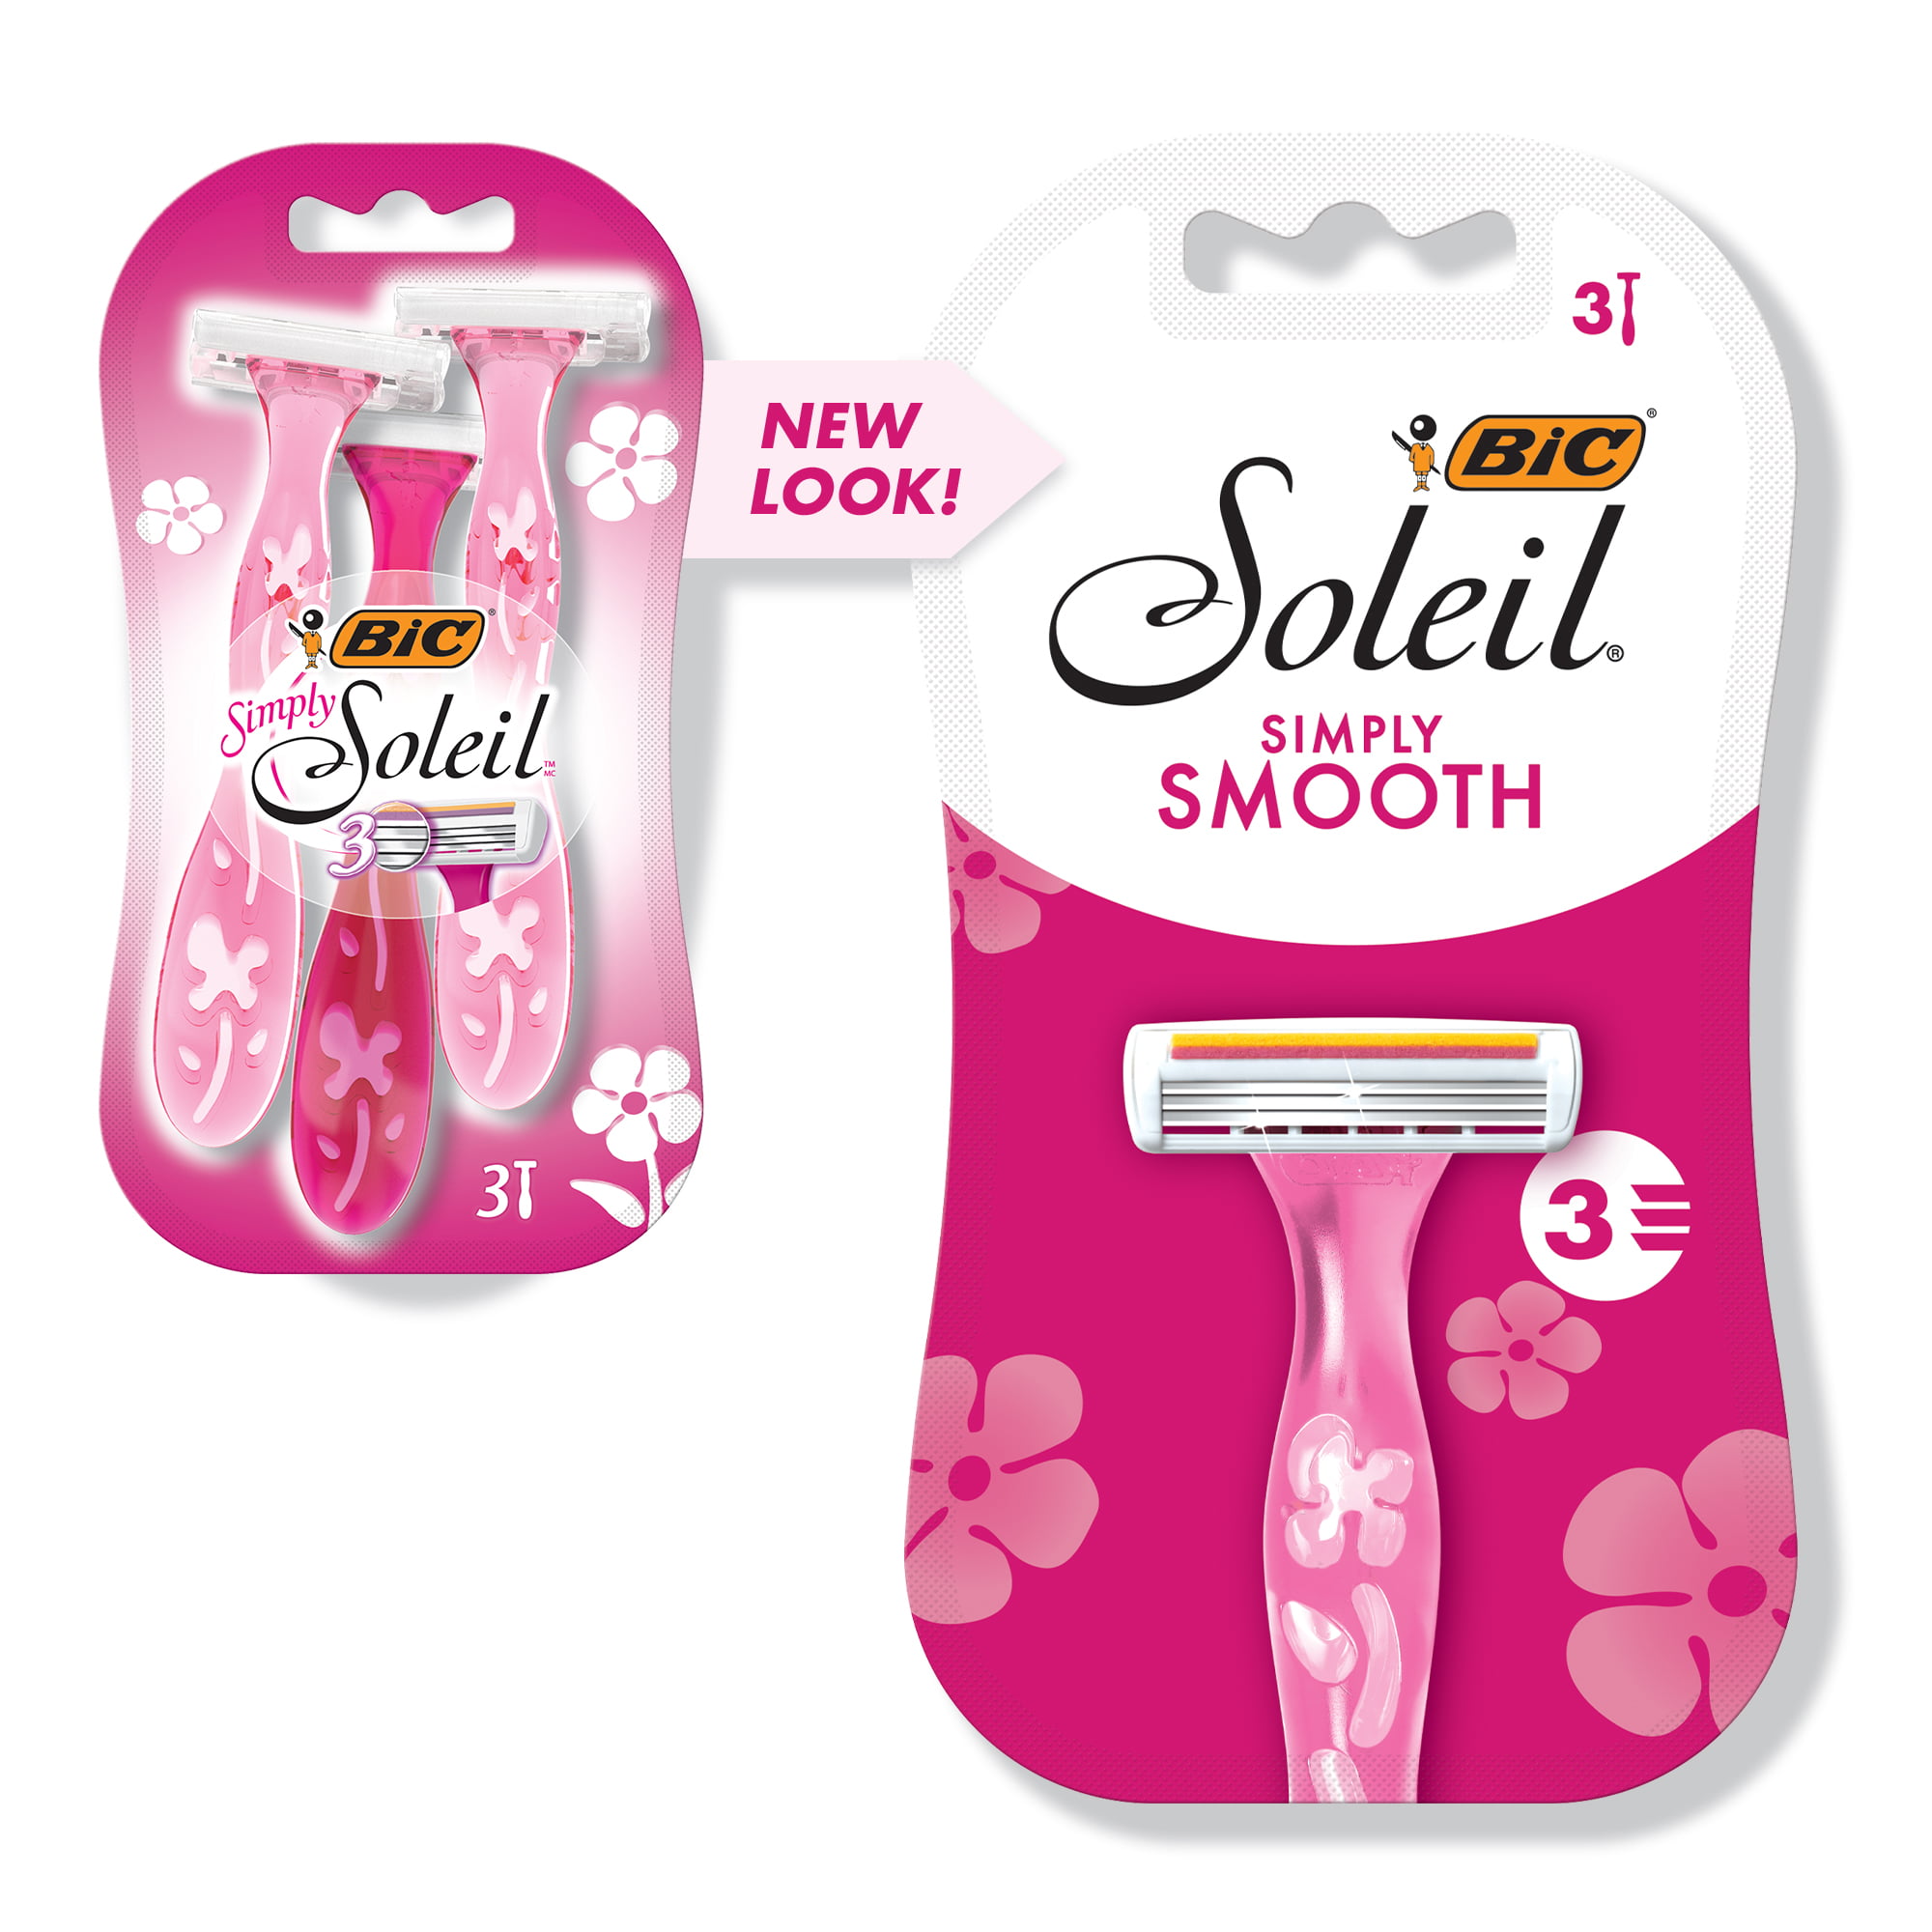 bic-soleil-simply-smooth-disposable-razor-women-3-count-free-nude